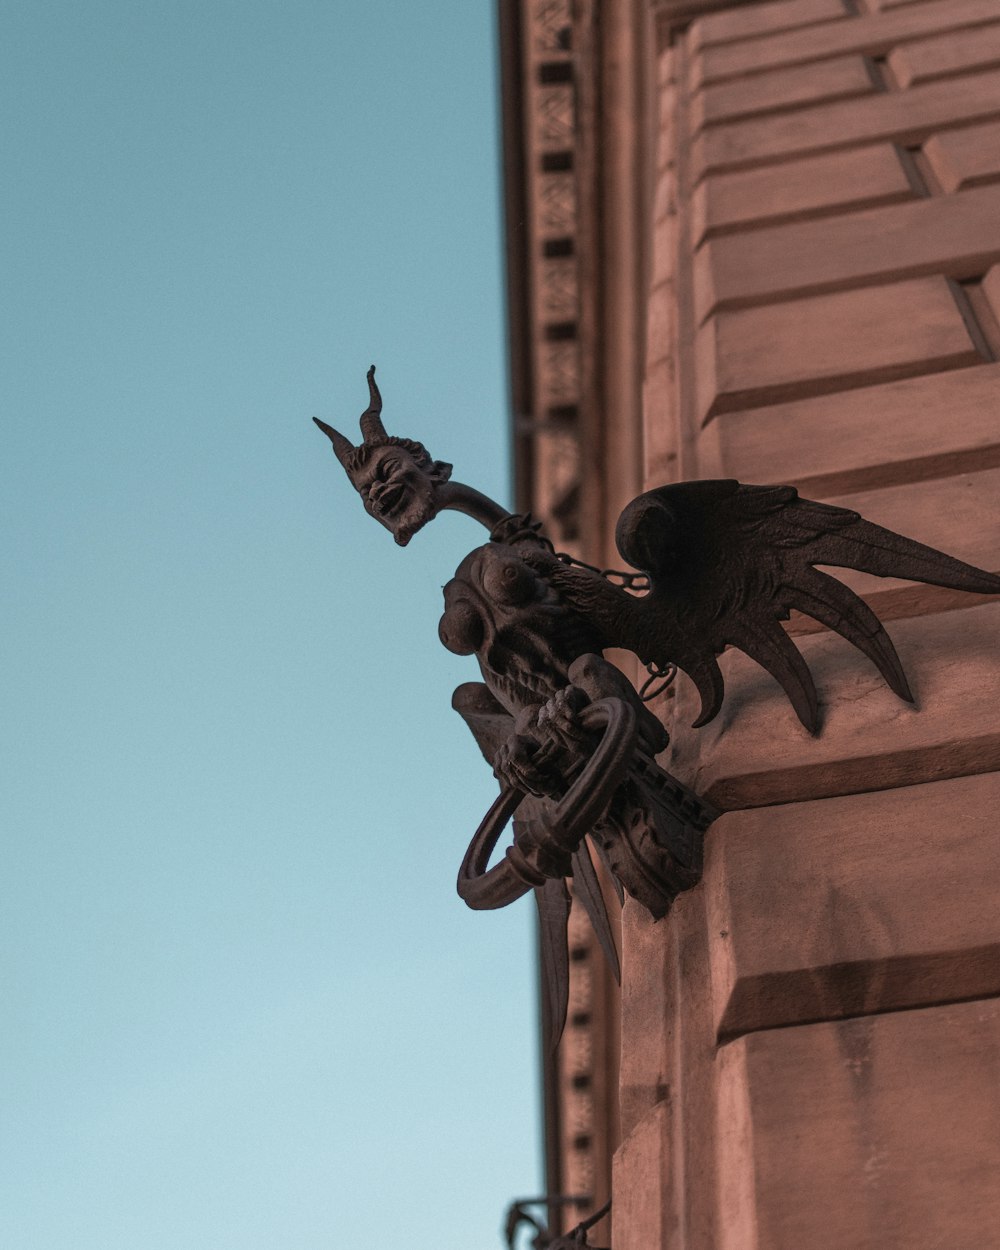 black dragon statue on brown concrete building during daytime